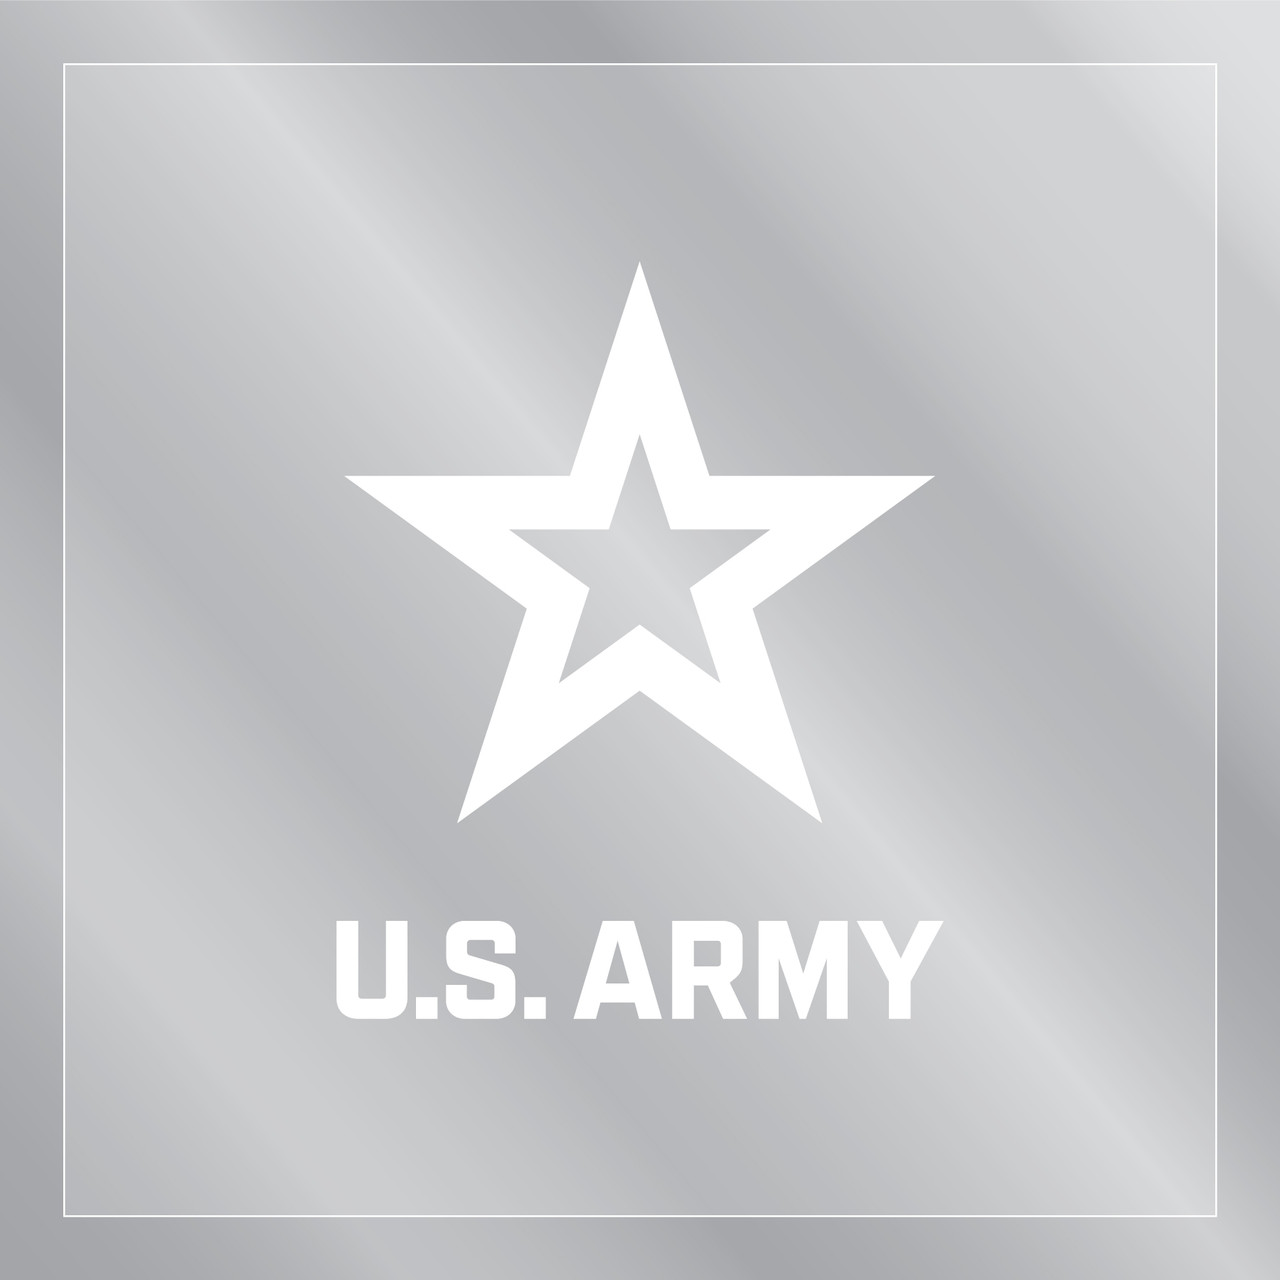 Us Military Service Star Logo PNG Transparent Background, Free Download  #9360 - FreeIconsPNG